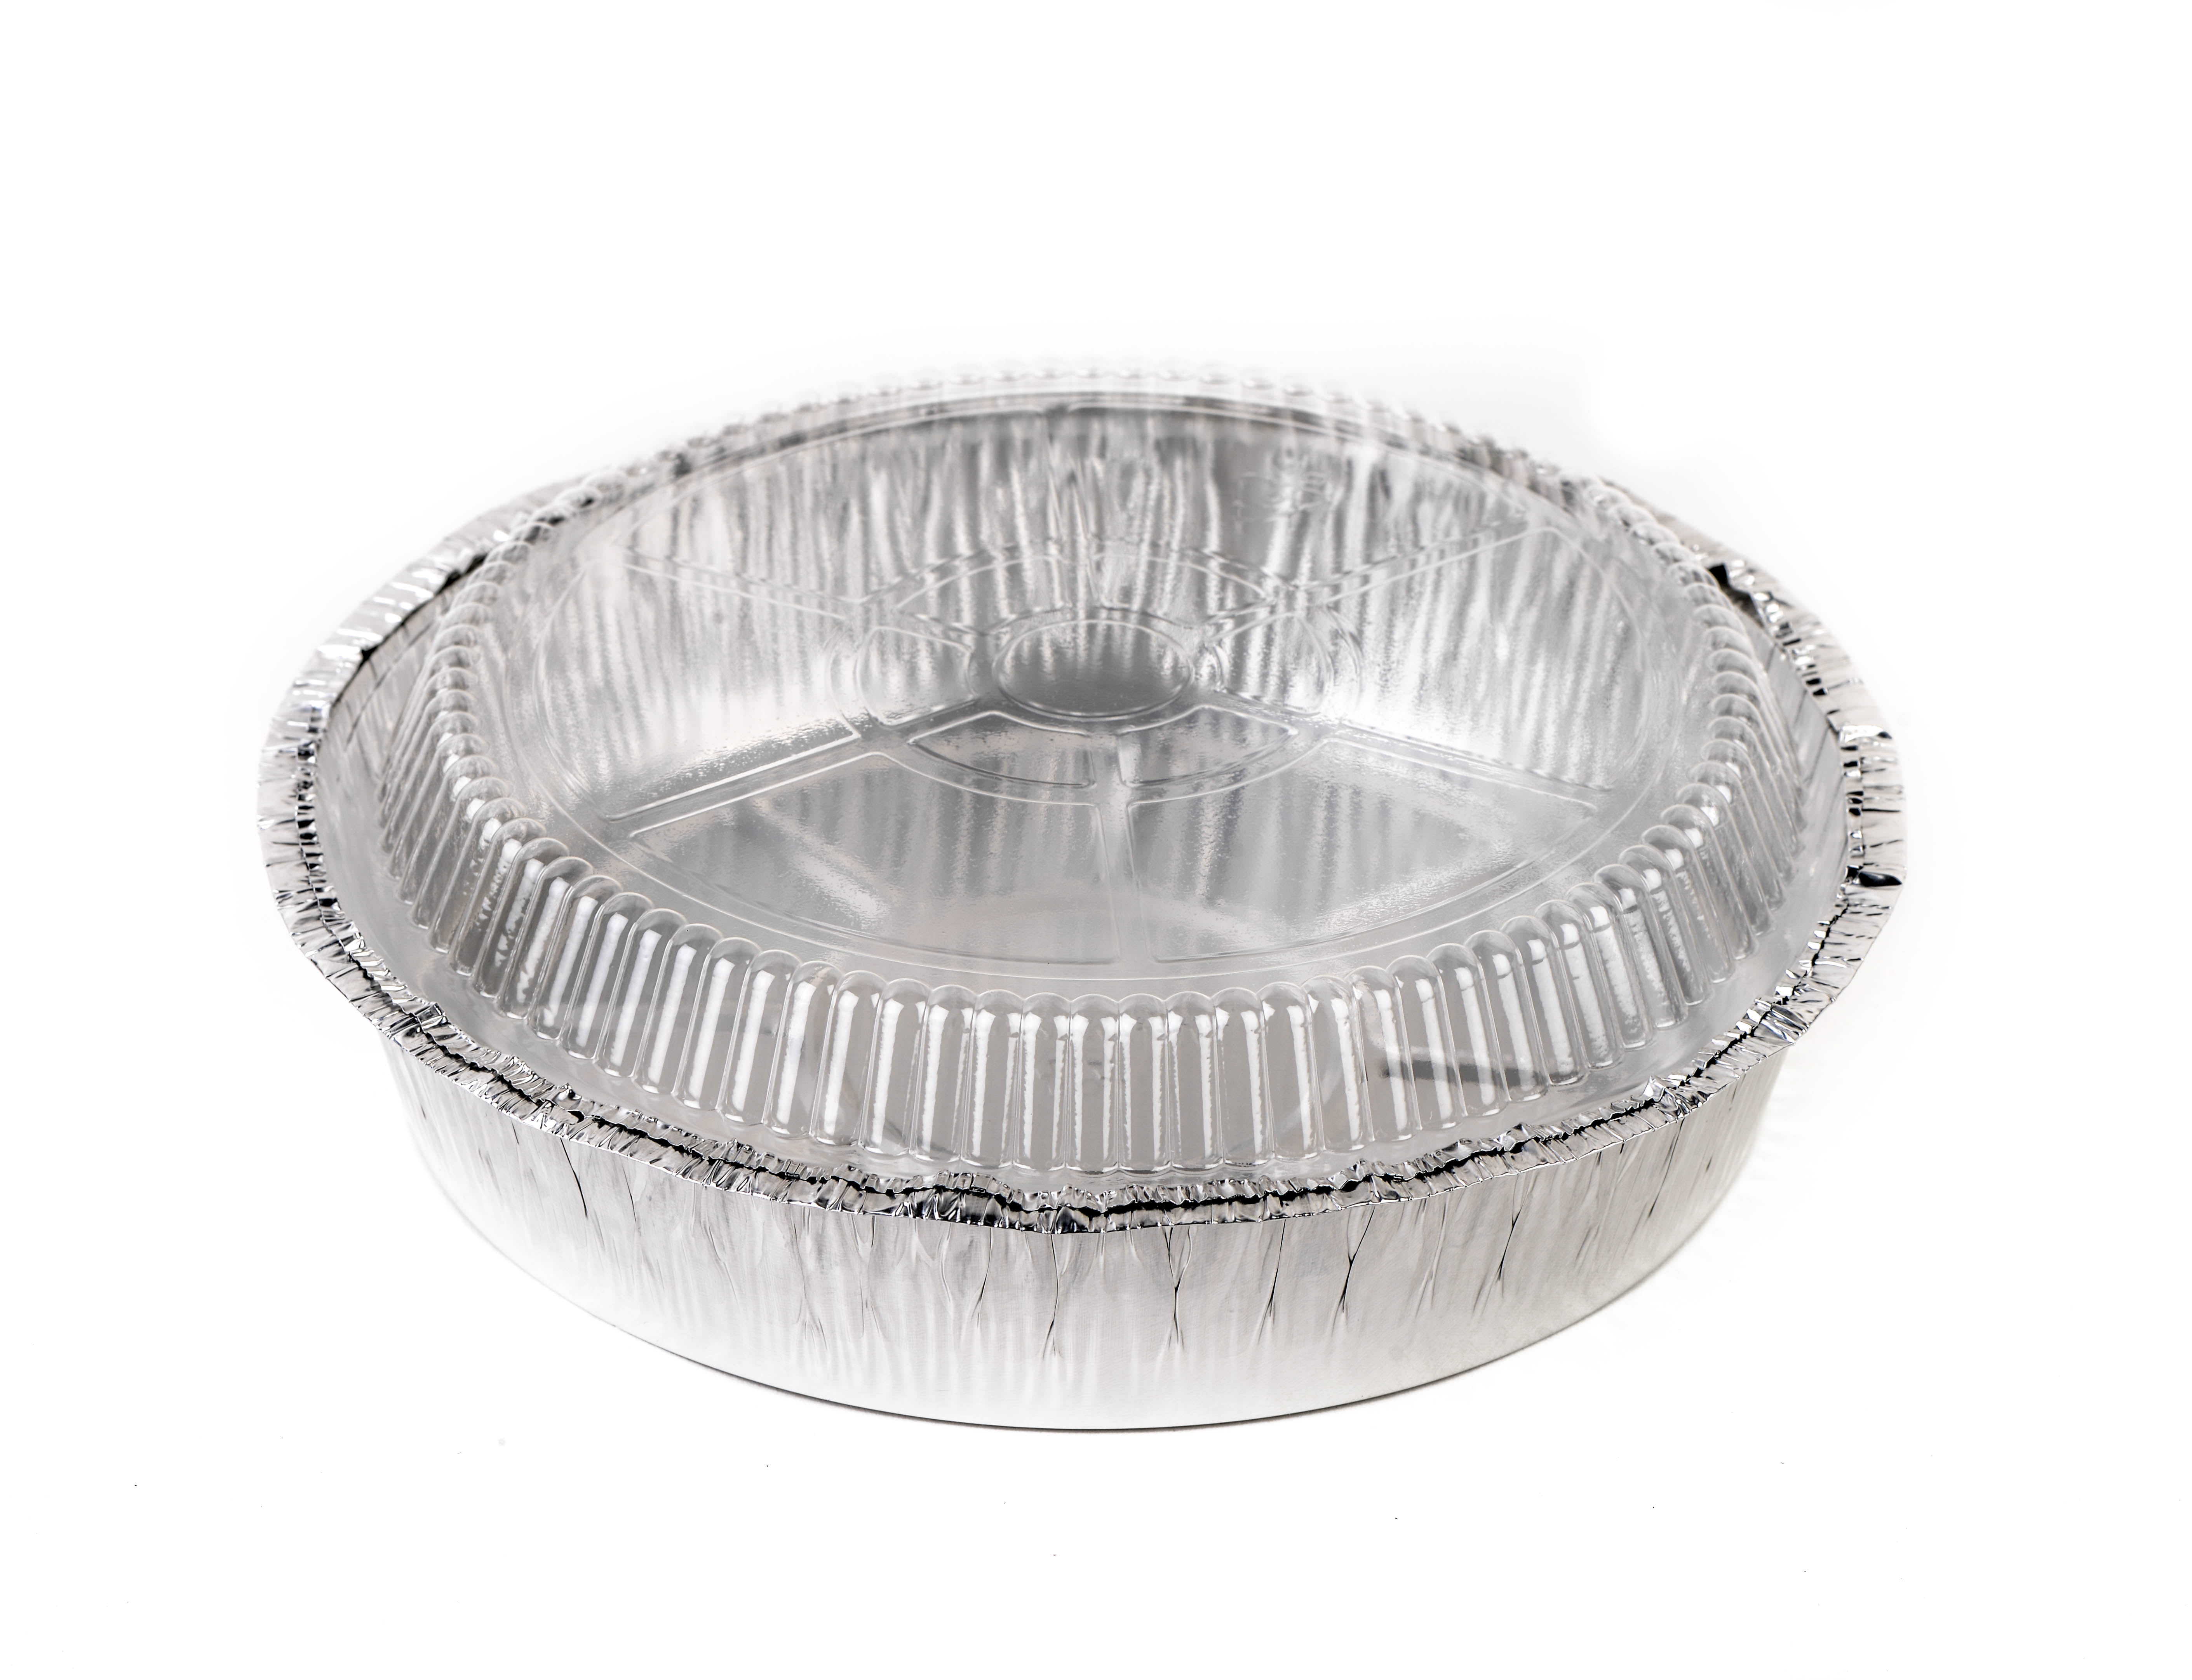 Square Aluminium Foil Trays and Lids 6"x6" Disposable Baking Catering Containers 